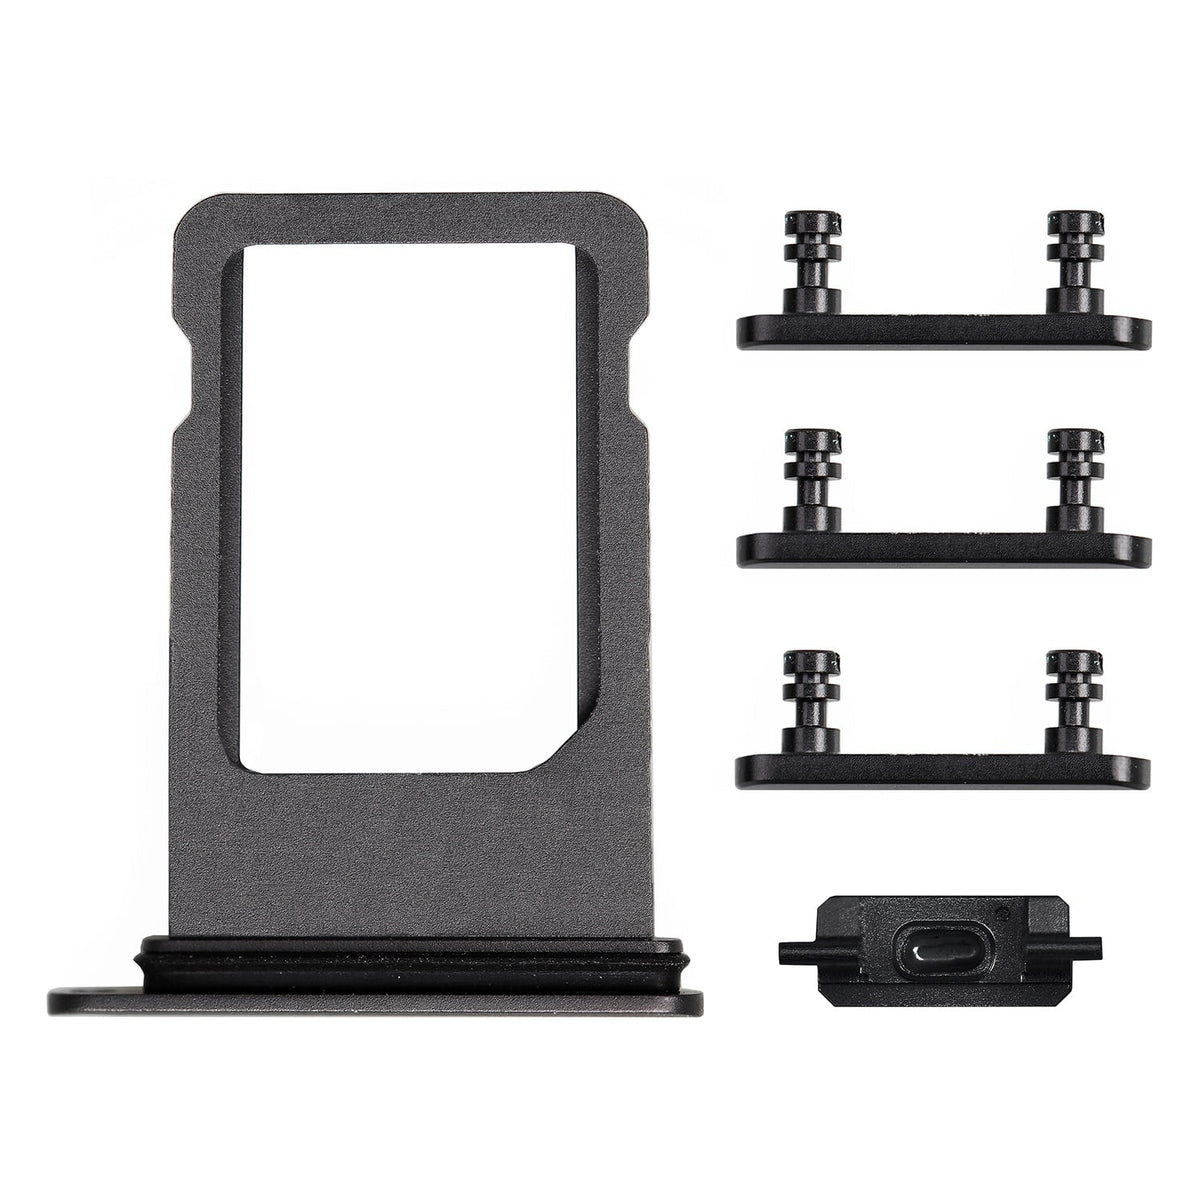 BLACK SIDE BUTTONS SET WITH SIM TRAY FOR IPHONE 8/SE 2ND/SE 3RD.